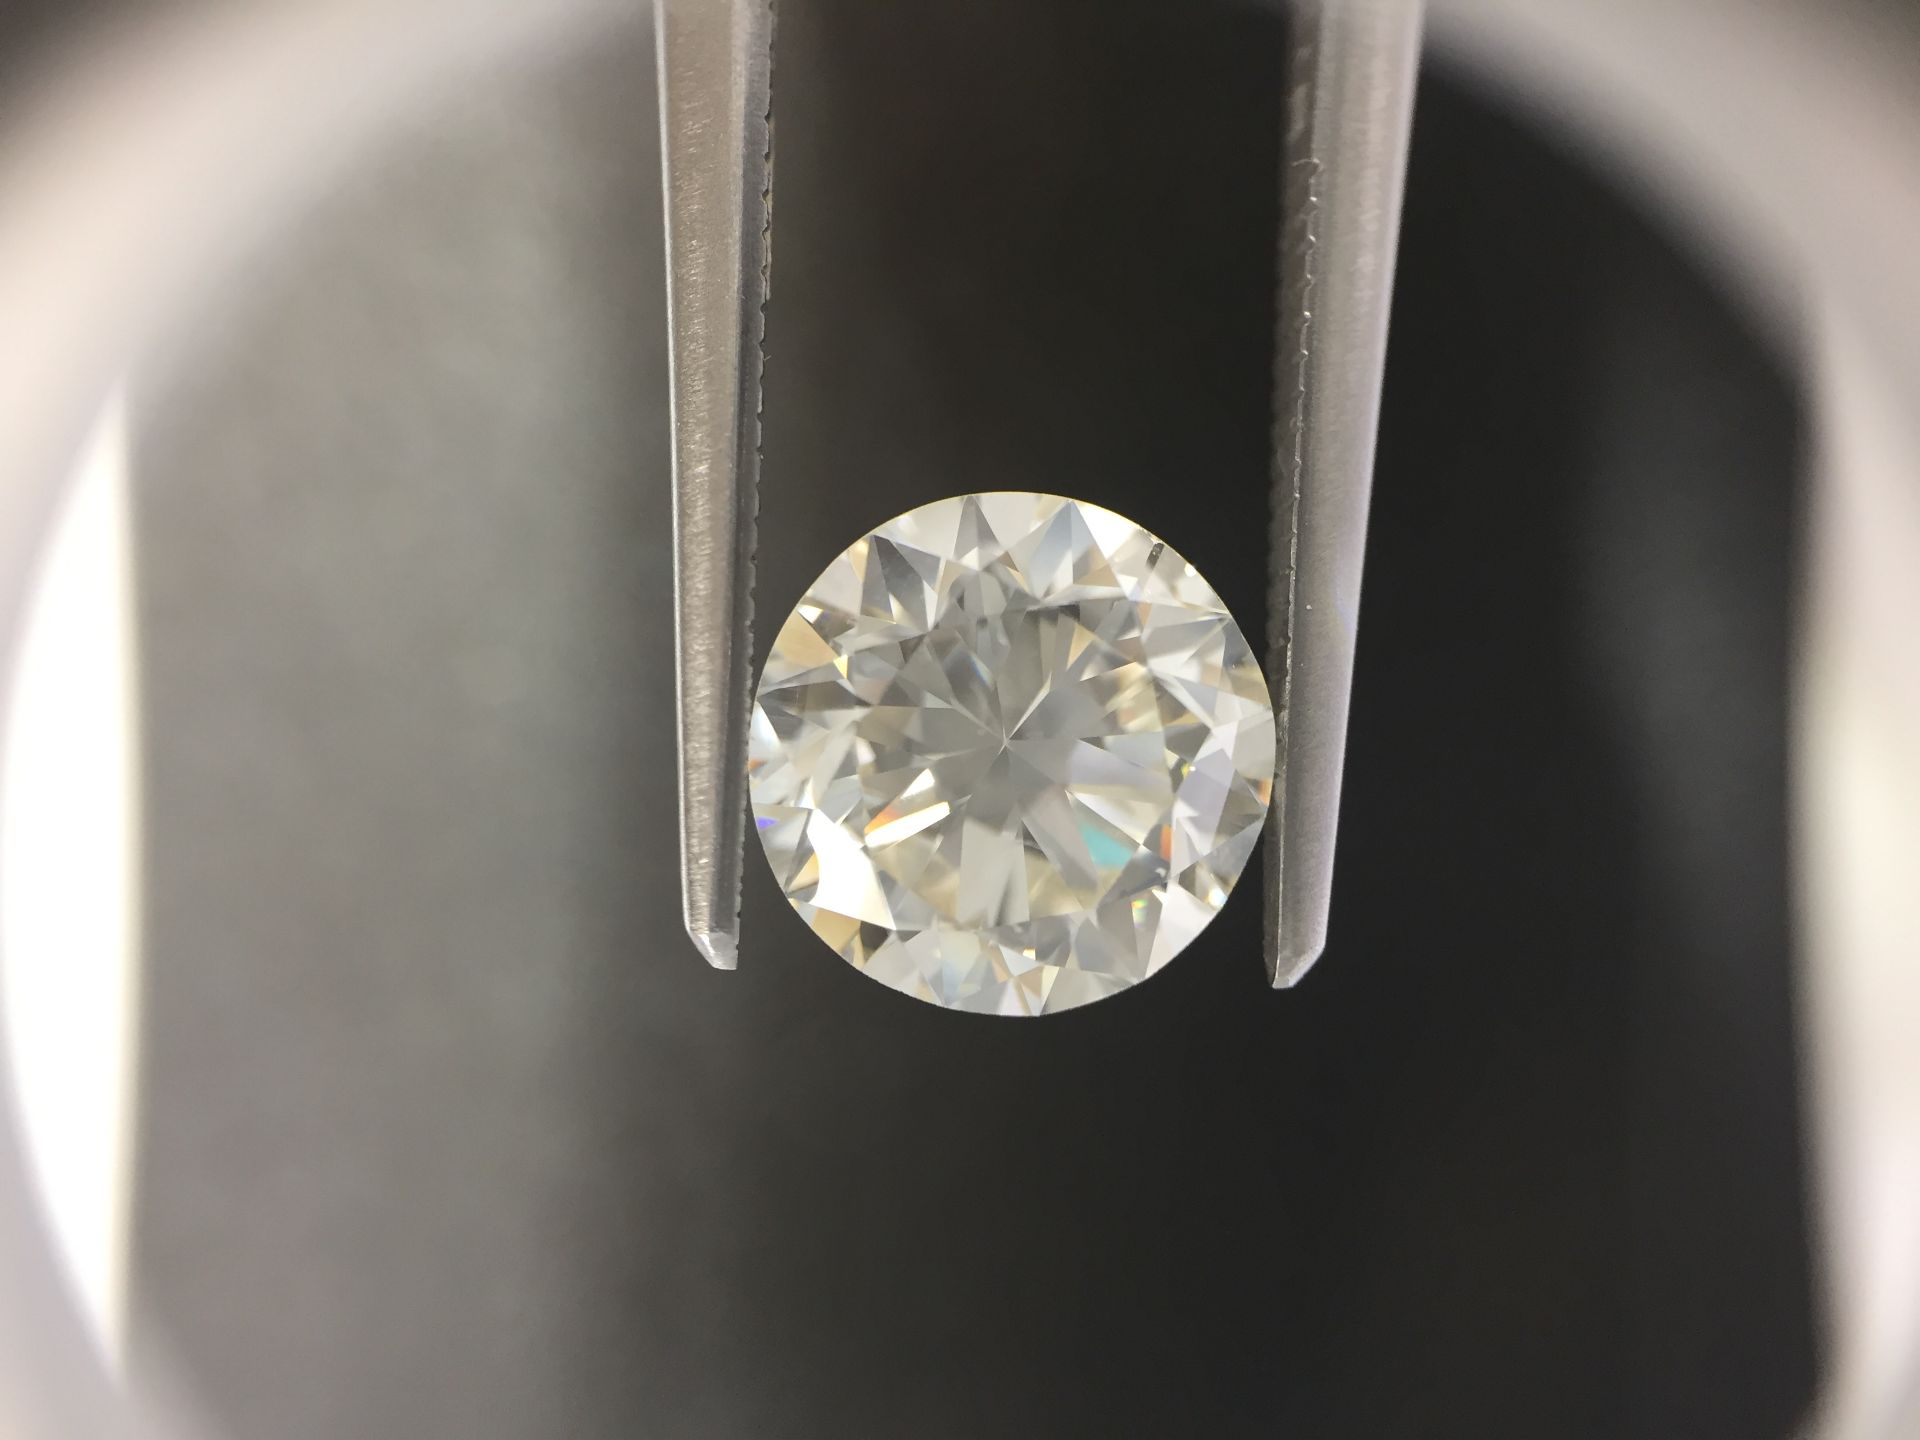 2.00ct brilliant cut diamond. G colour, VVS2 clarity. No certification. Can be used for ring or